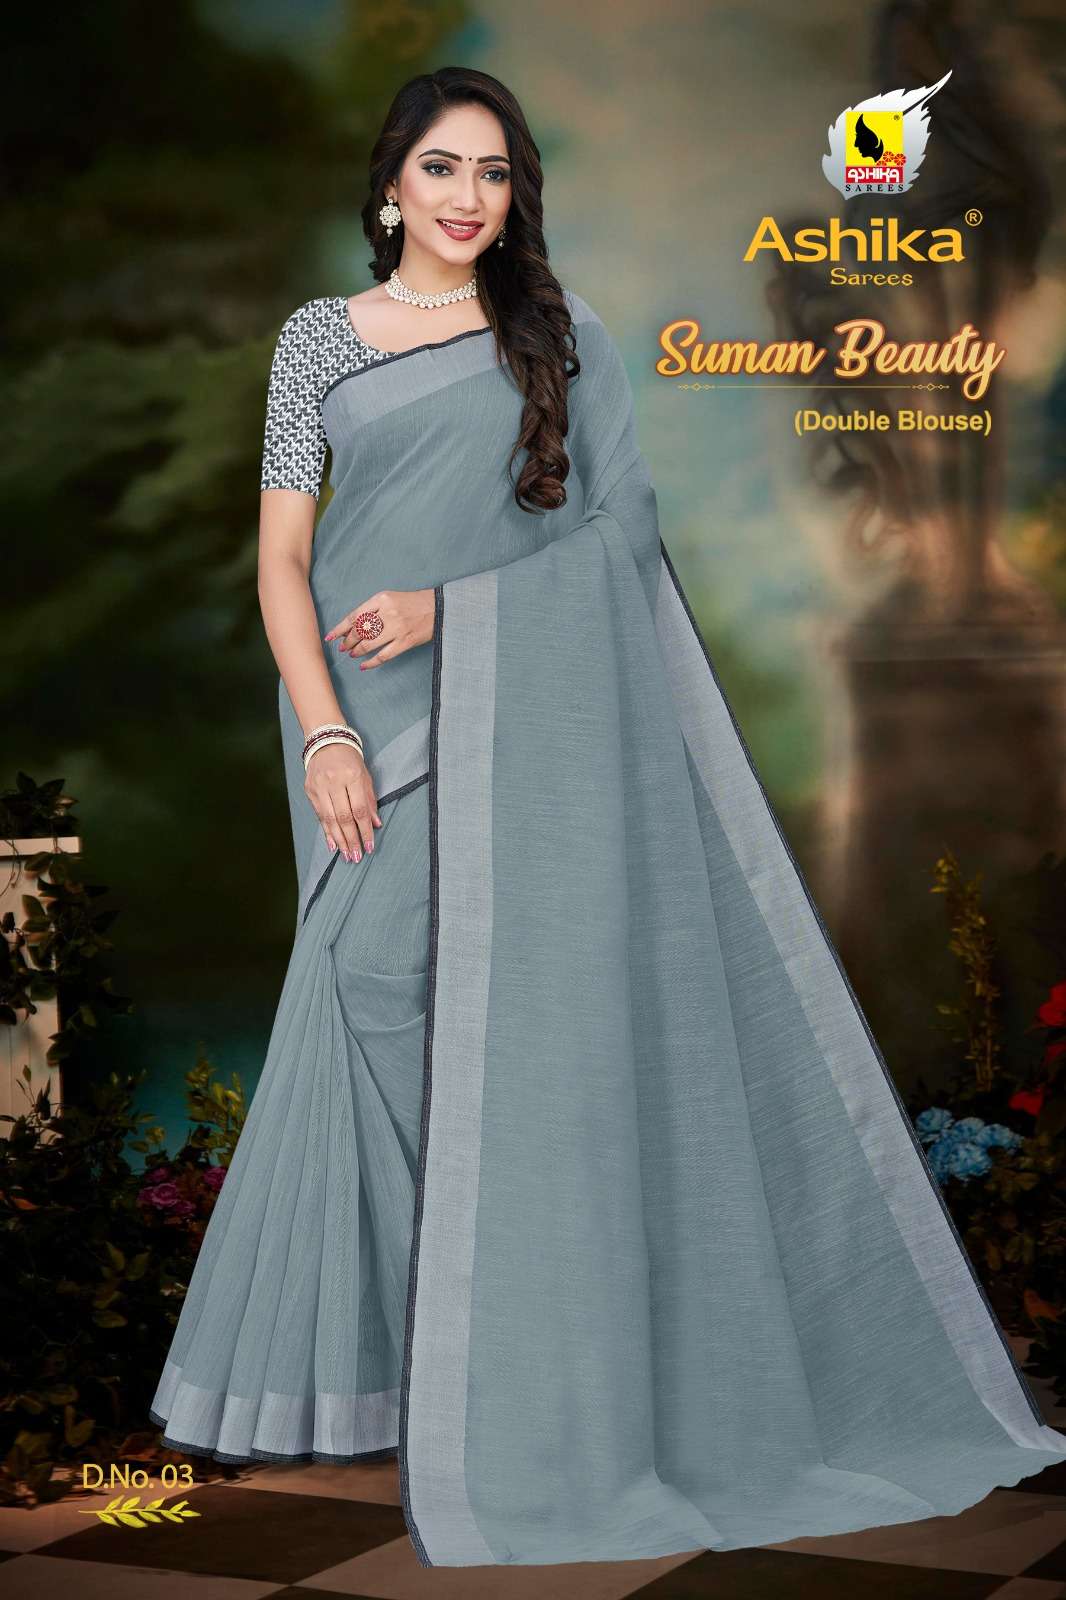 ashika saree present suman beauty fancy sarees with double blouse peice collection 